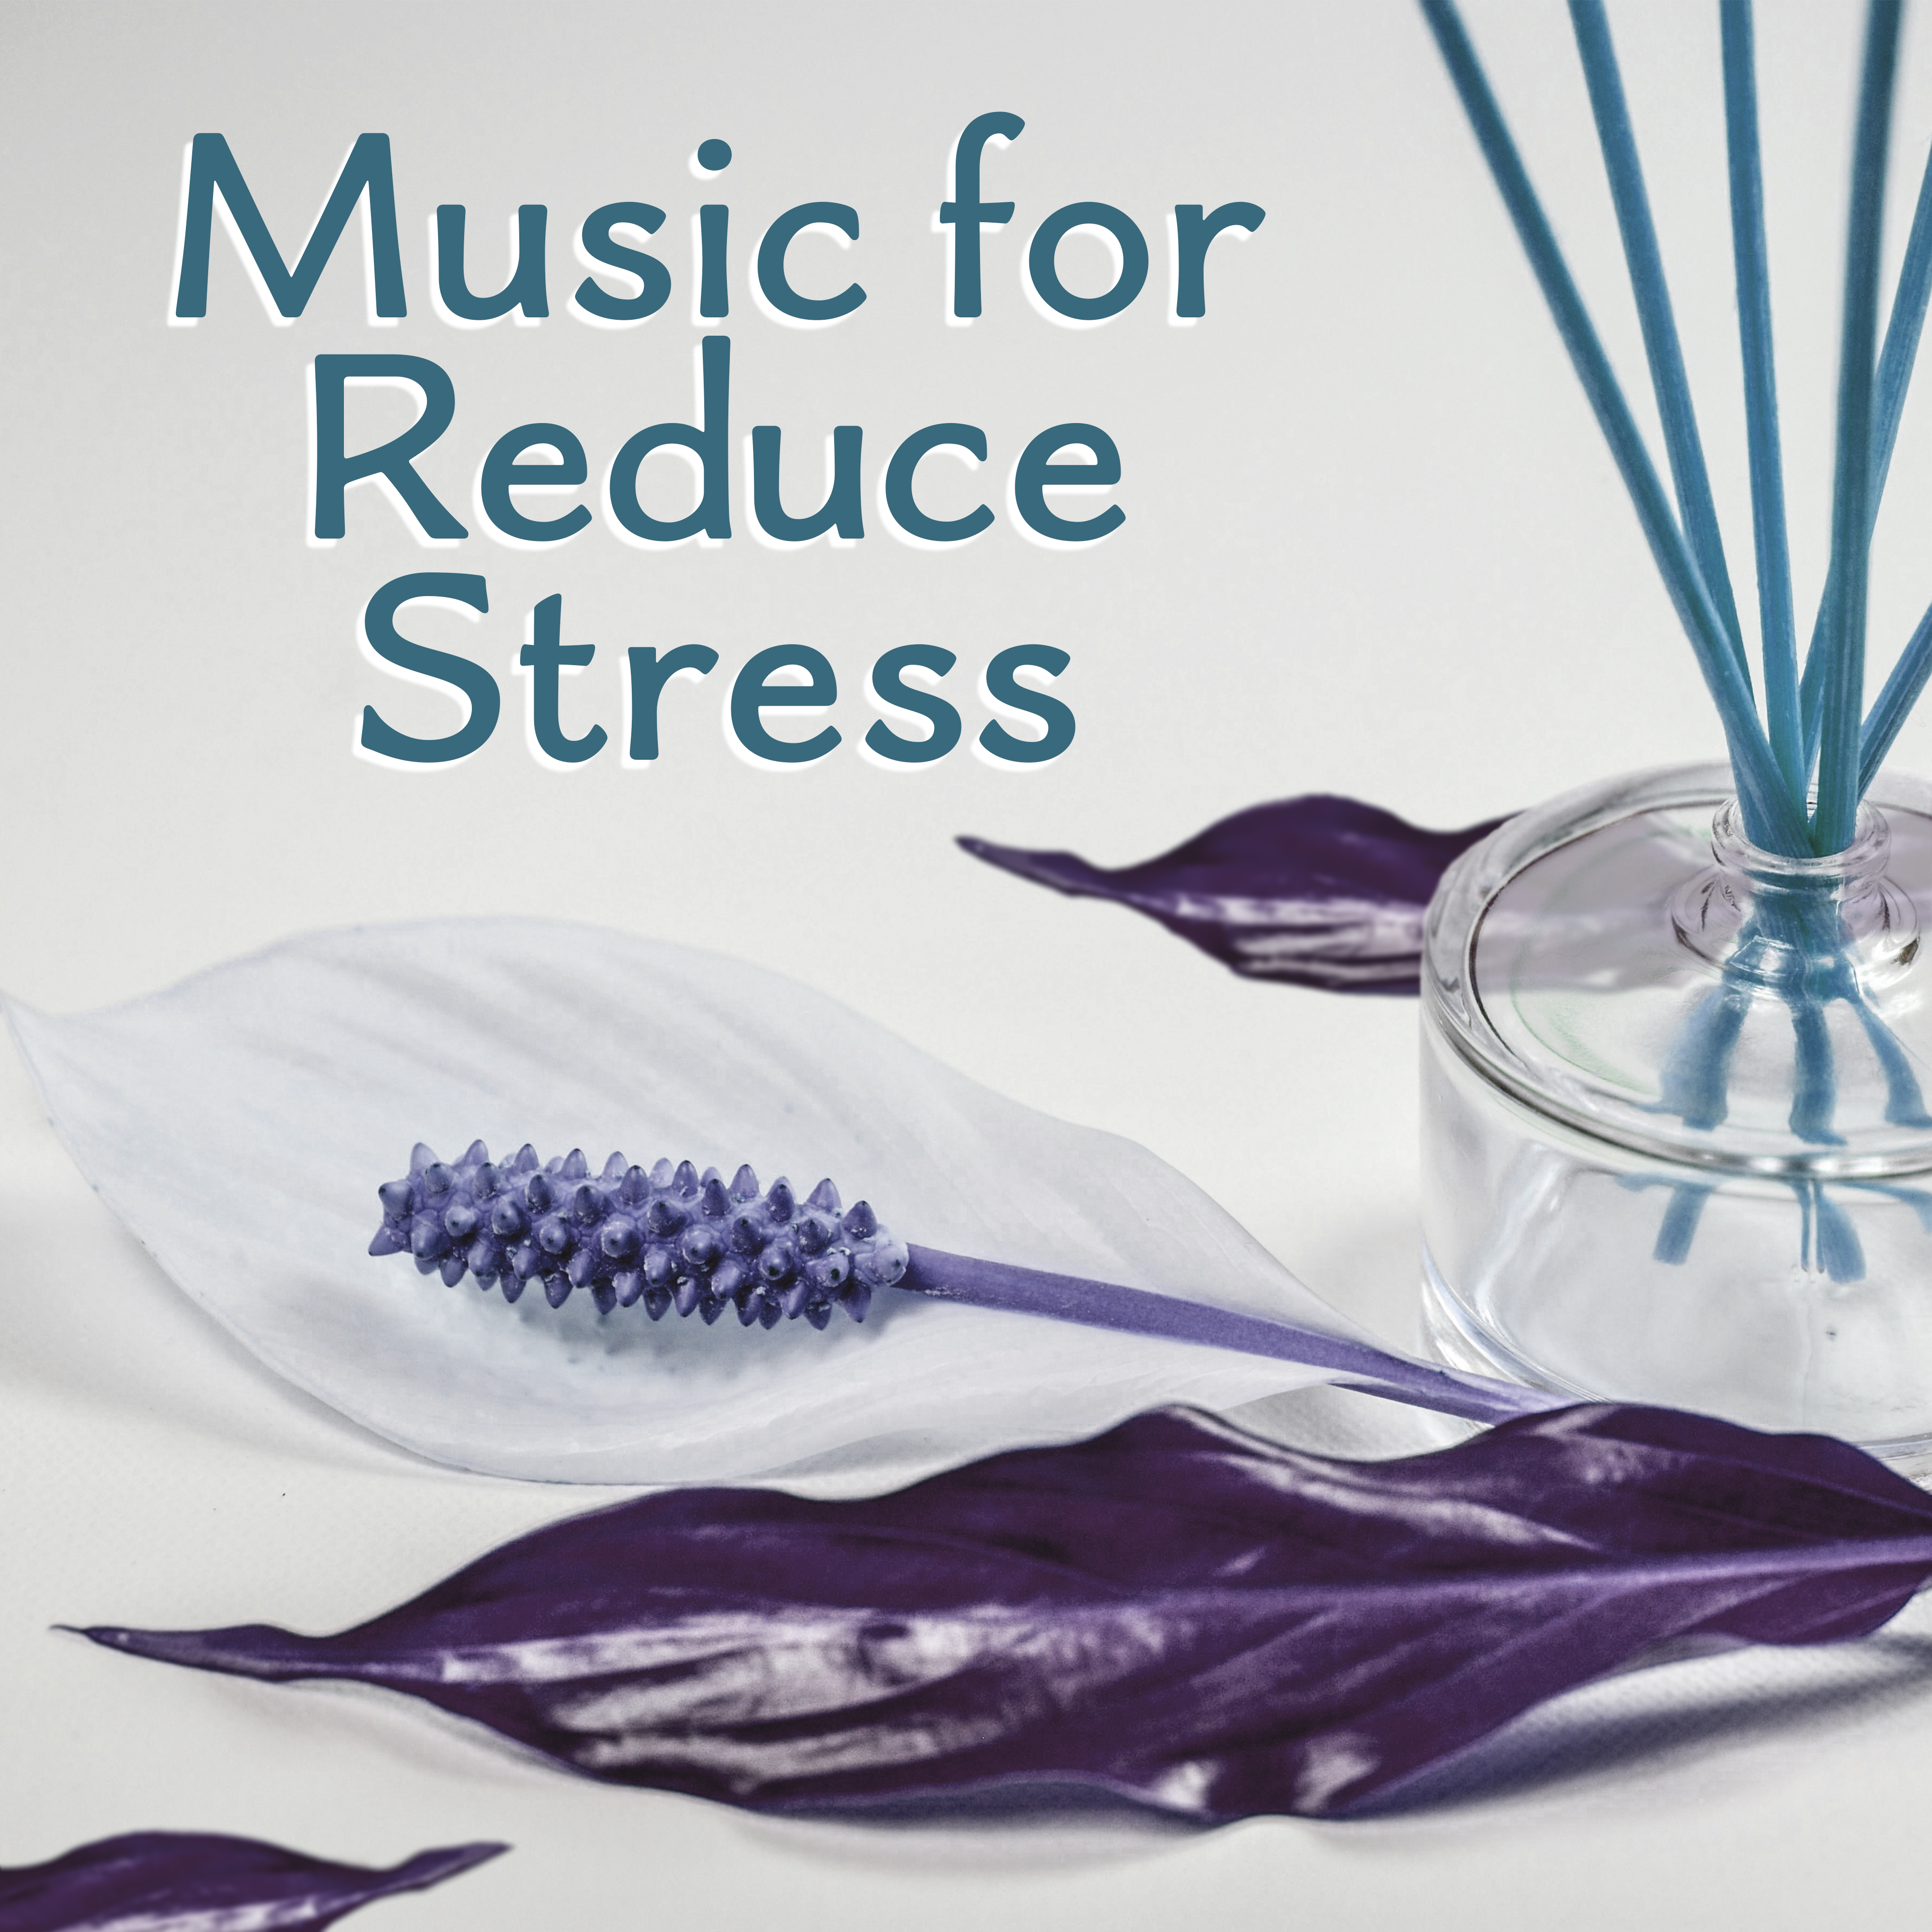 Music for Reduce Stress – Calming Sounds of Nature, Relaxing Music, Rest, Music for Relax, Spa, Deep Meditation